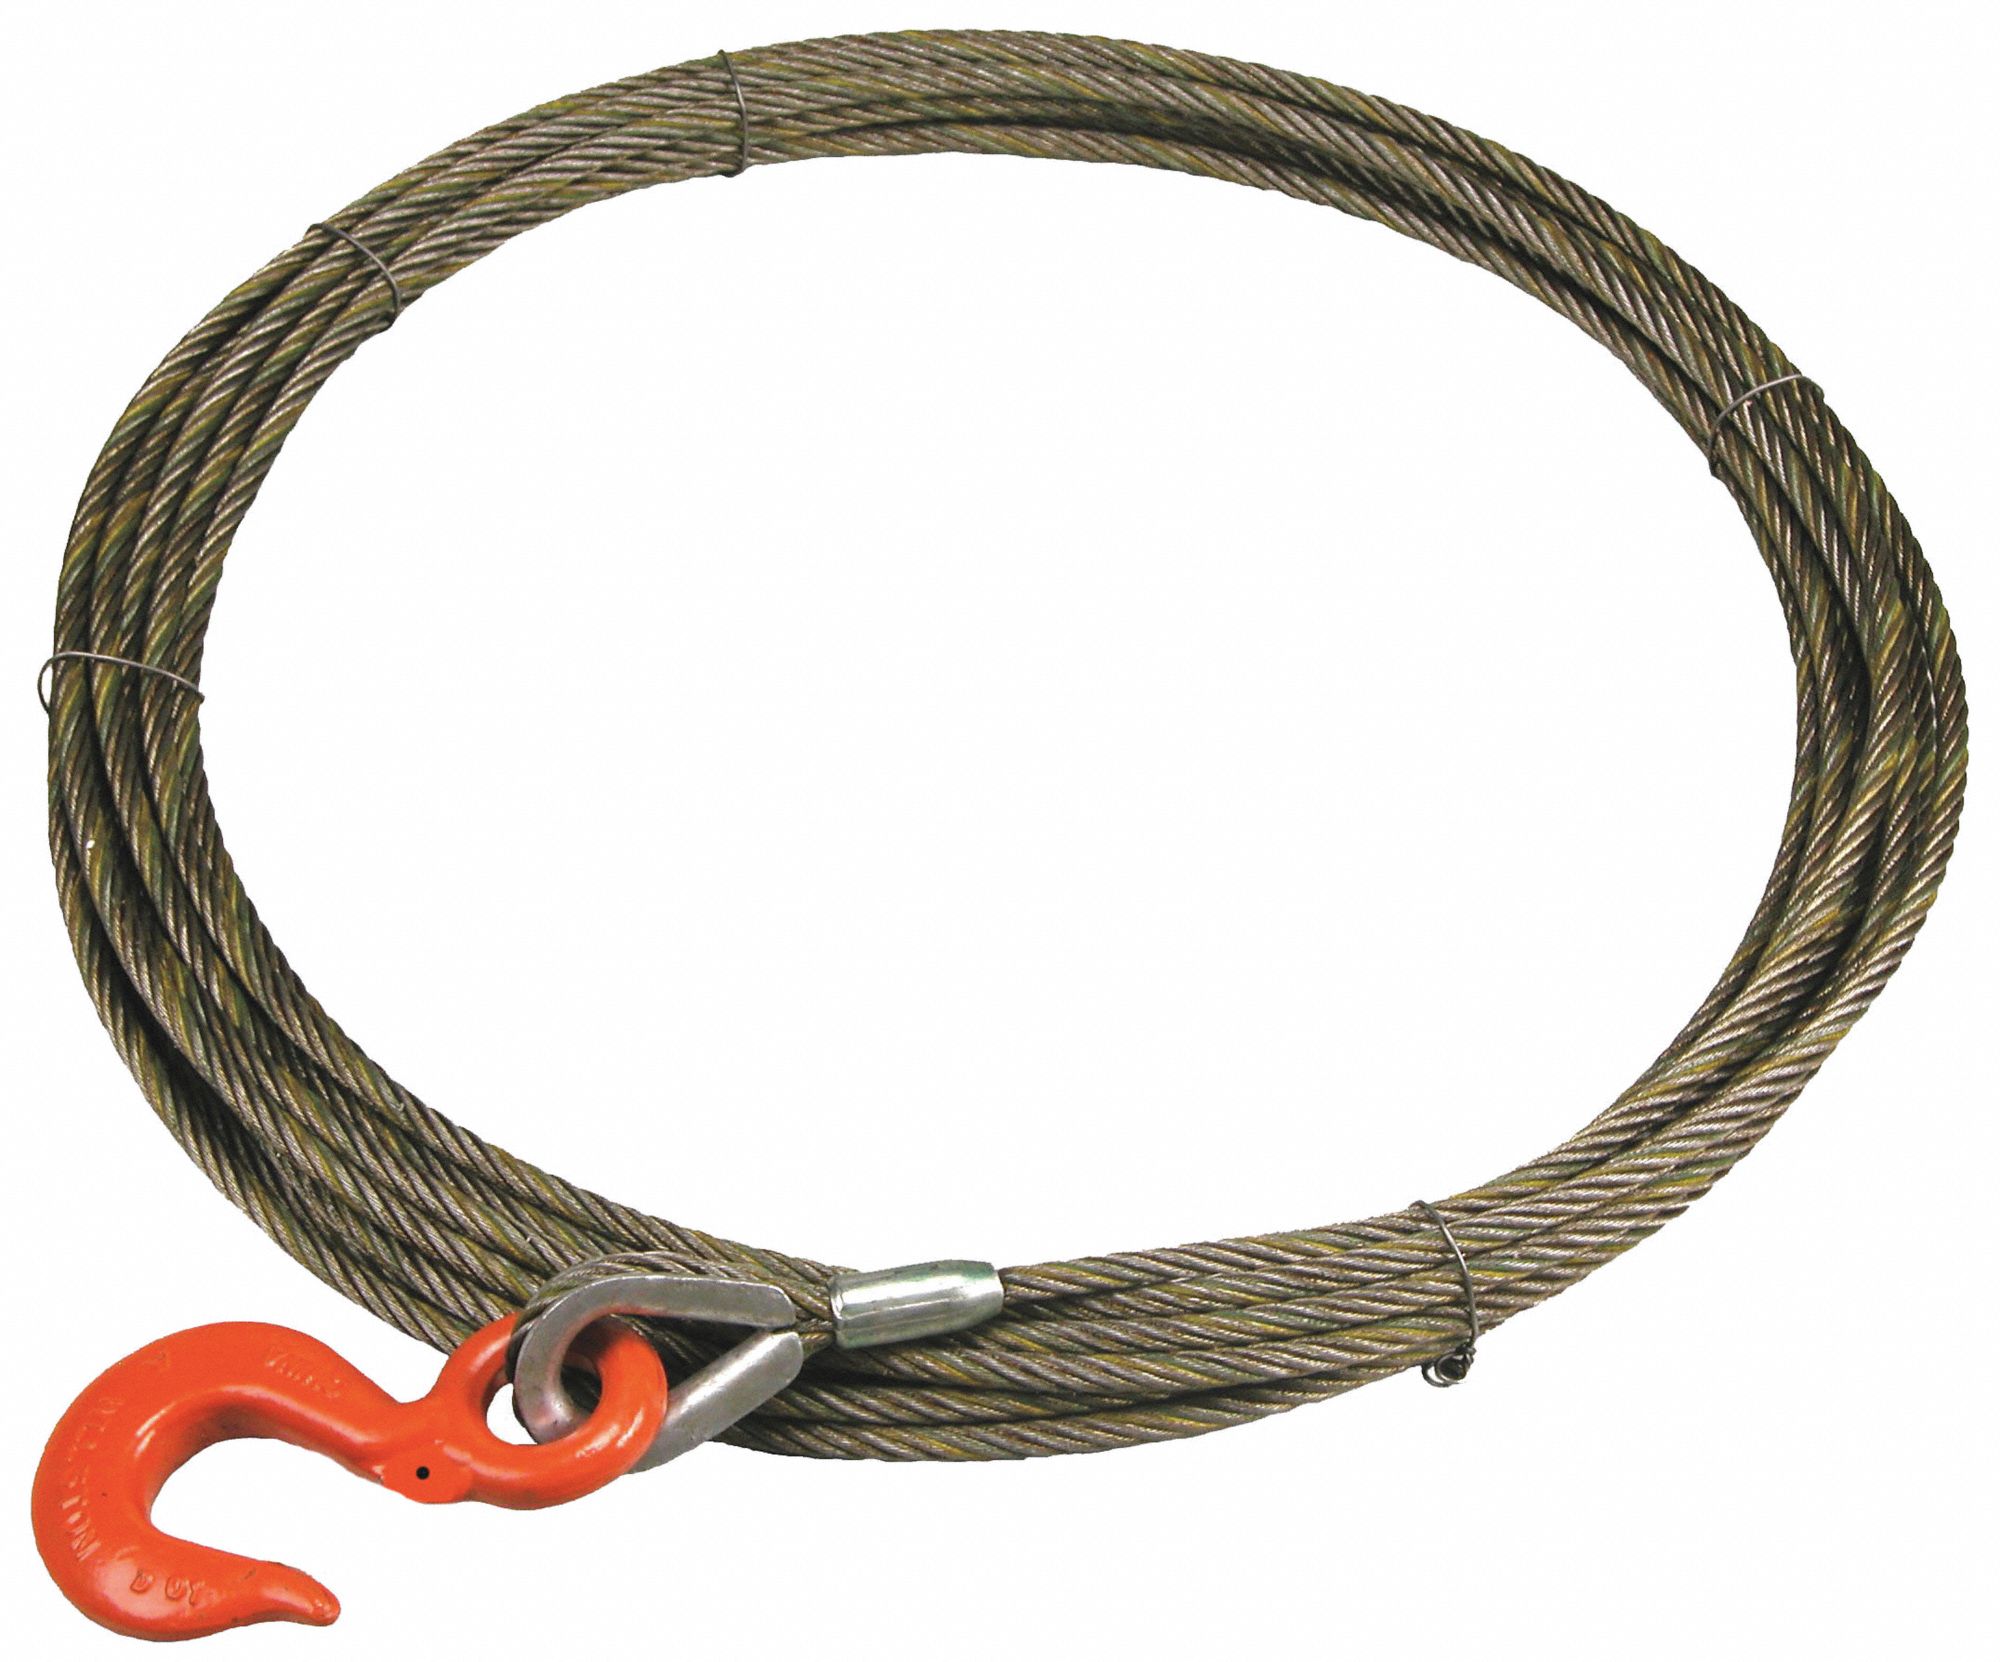 38WSX50-50 ft Bright Lift-All 800 lb Working Load Limit Carbon Steel Wire Winch Cable with 4